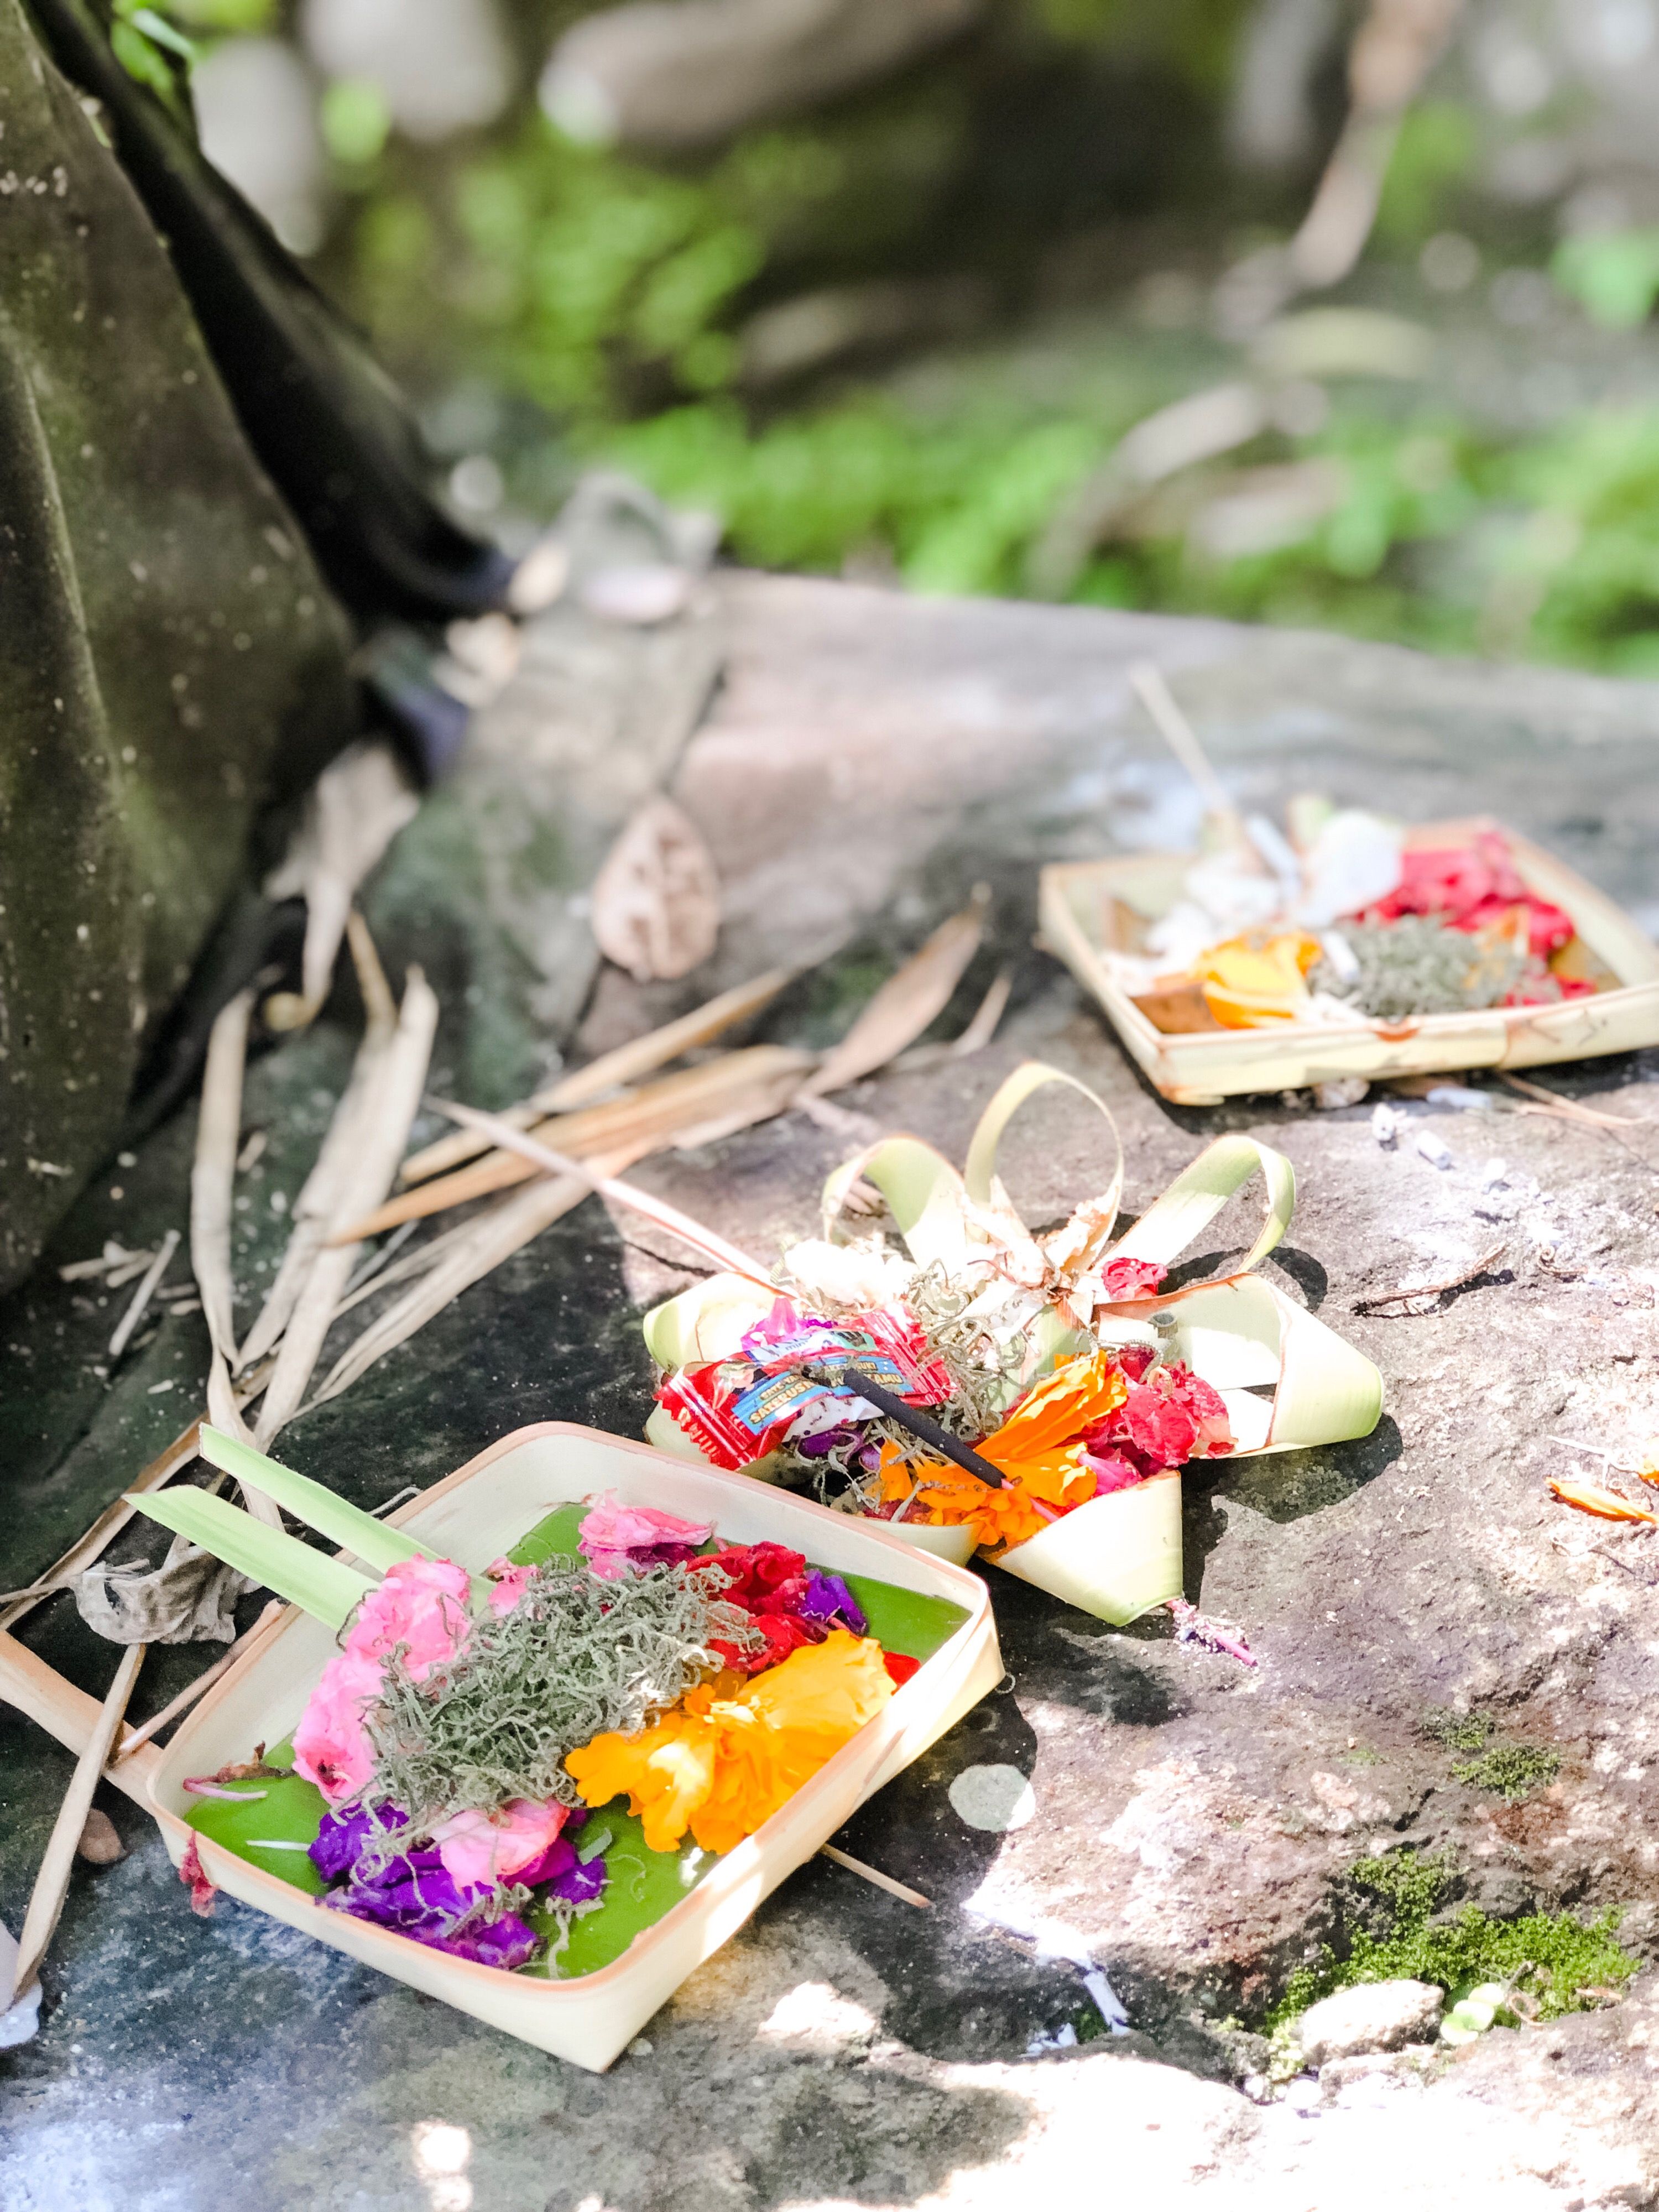 a beautiful chanang offering in the streets of bali